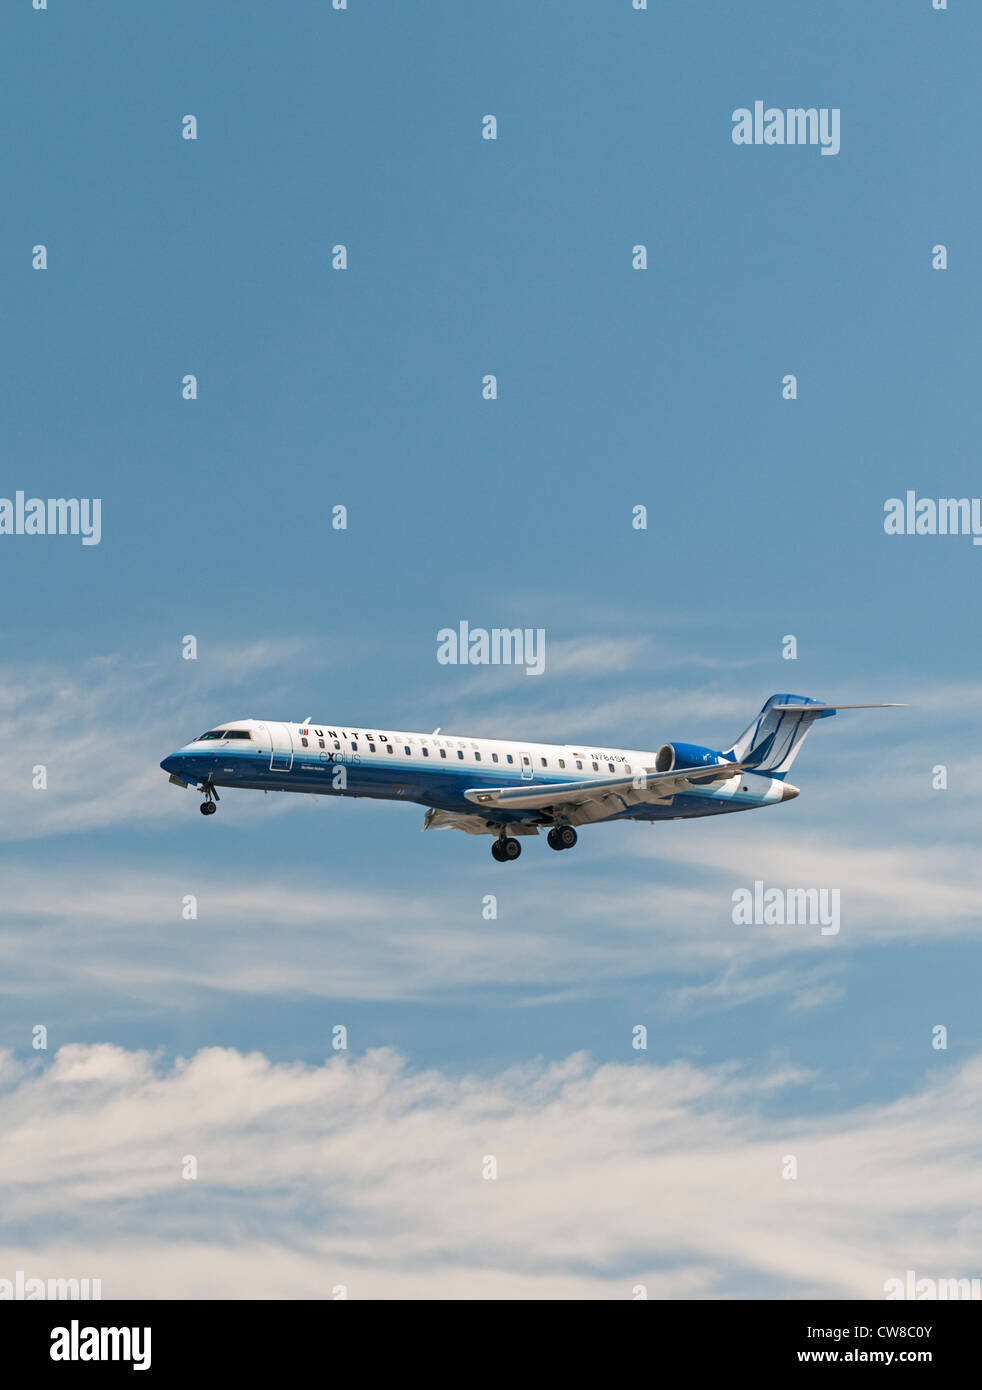 United Express (Skywest Airlines) plane Bombardier CRJ-700 regional jet air liner on final approach for landing. Stock Photo